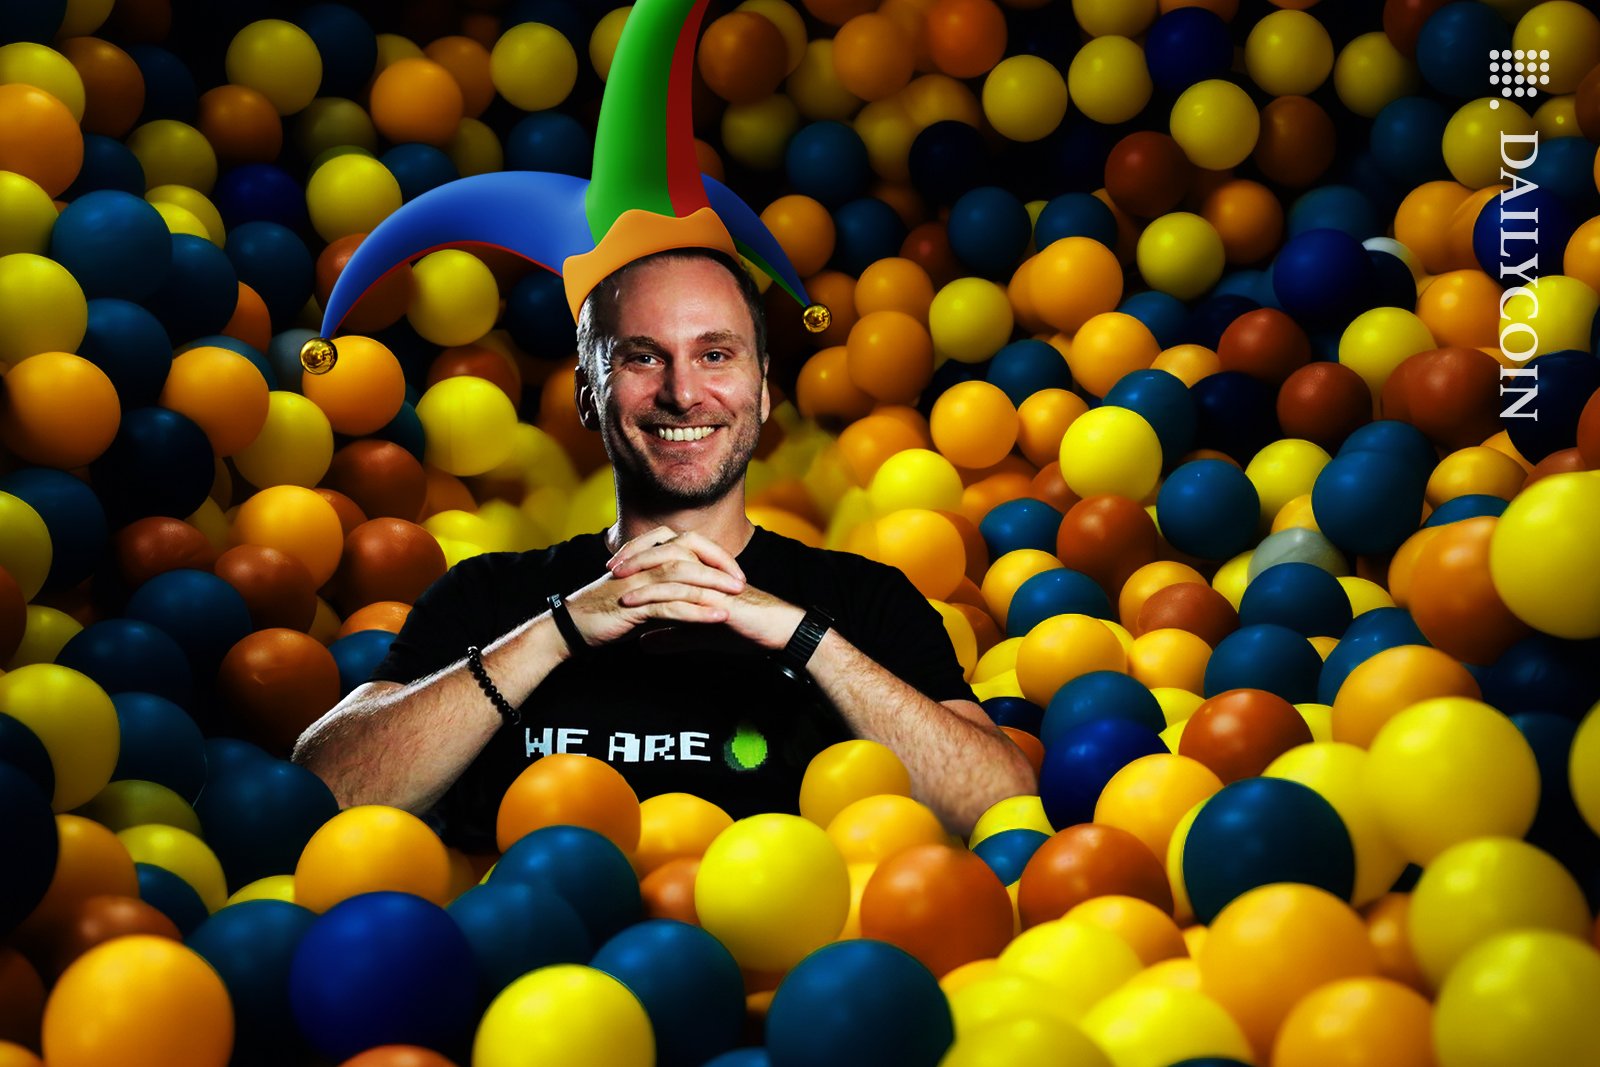 Tether ceo Paolo Ardoino dressed as a jester playing around in the ball pit.